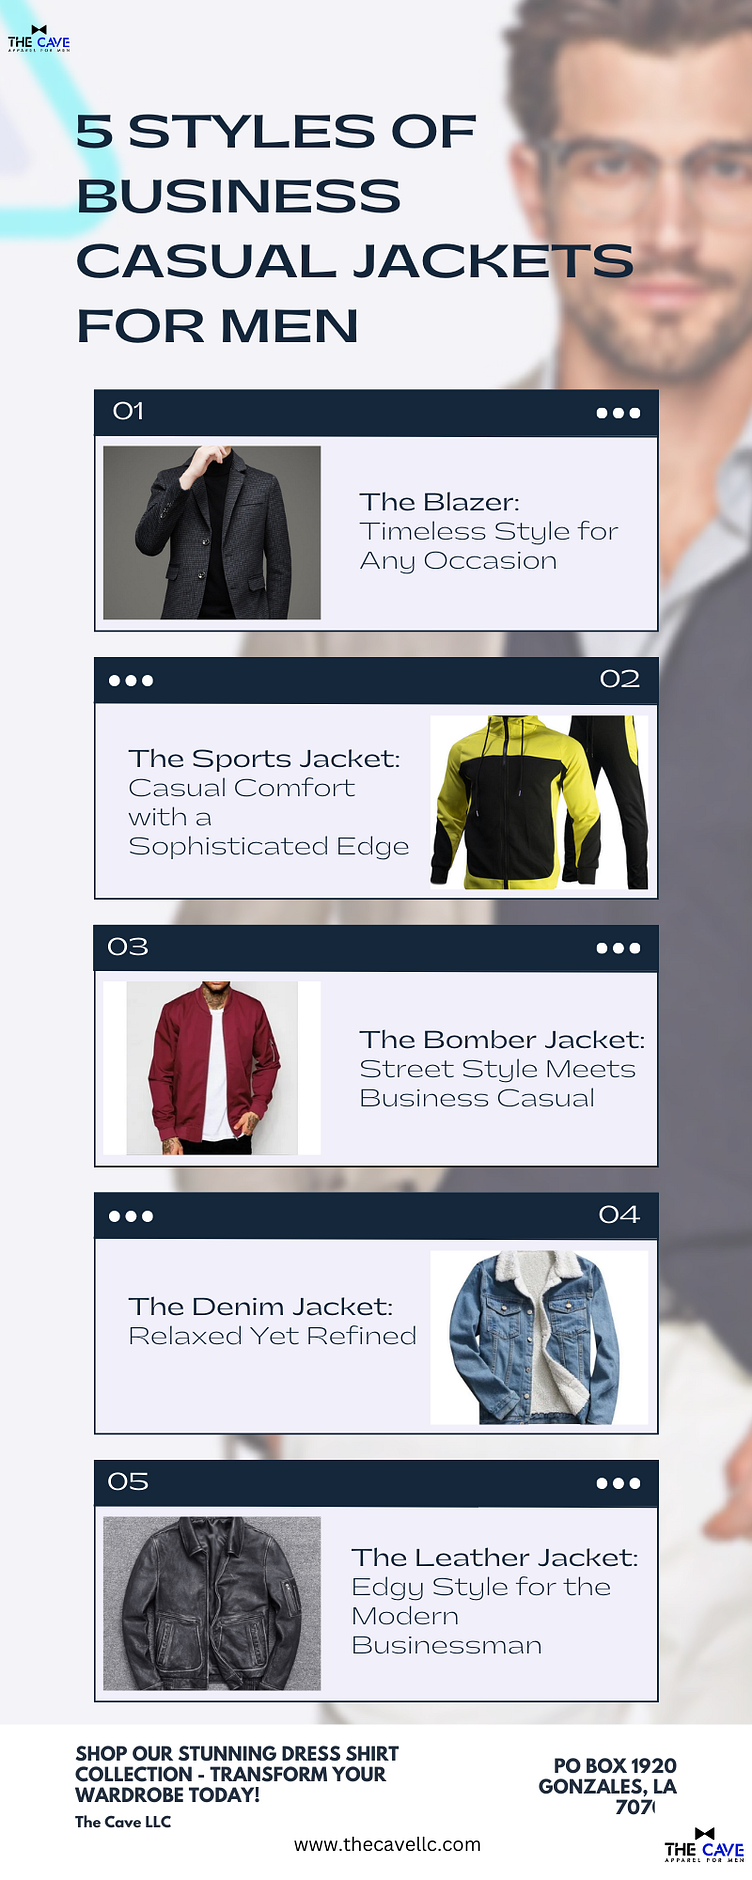 5 Styles of Business Casual Jackets for Men by The Cave LLC on Dribbble